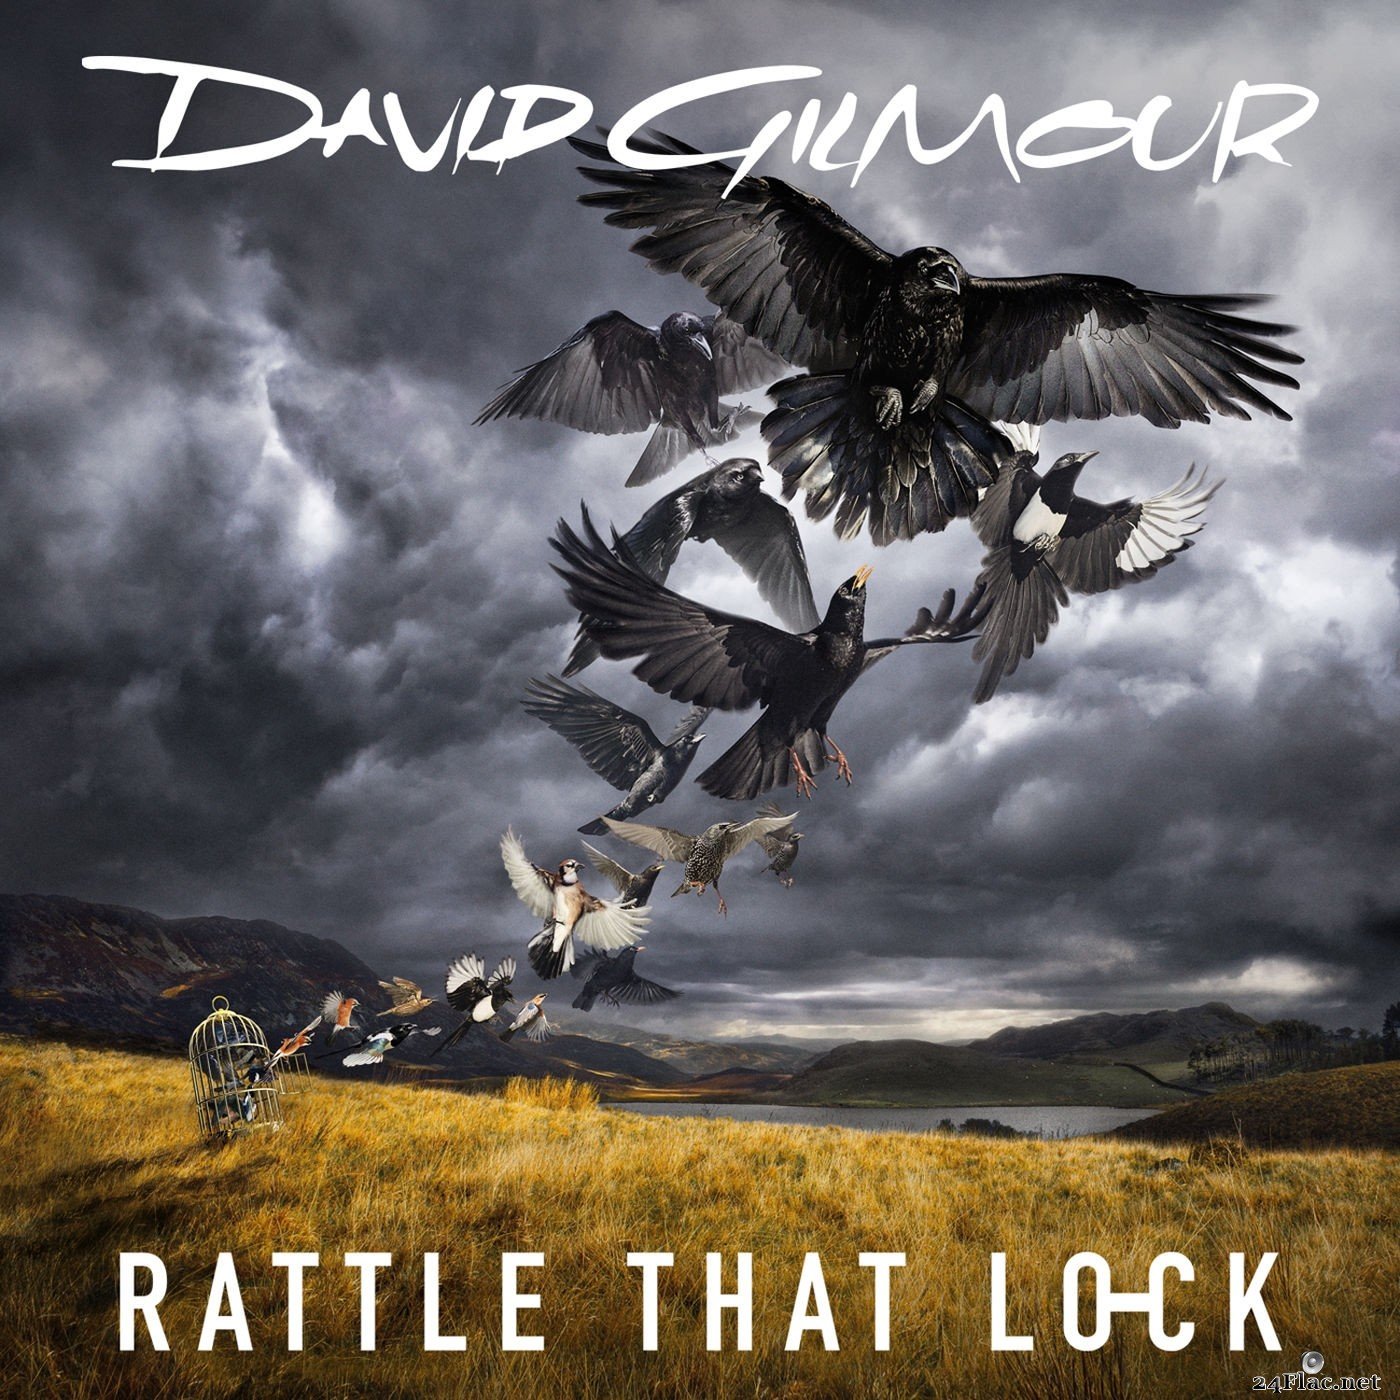 David Gilmour - Rattle That Lock (Deluxe) (2015) Hi-Res